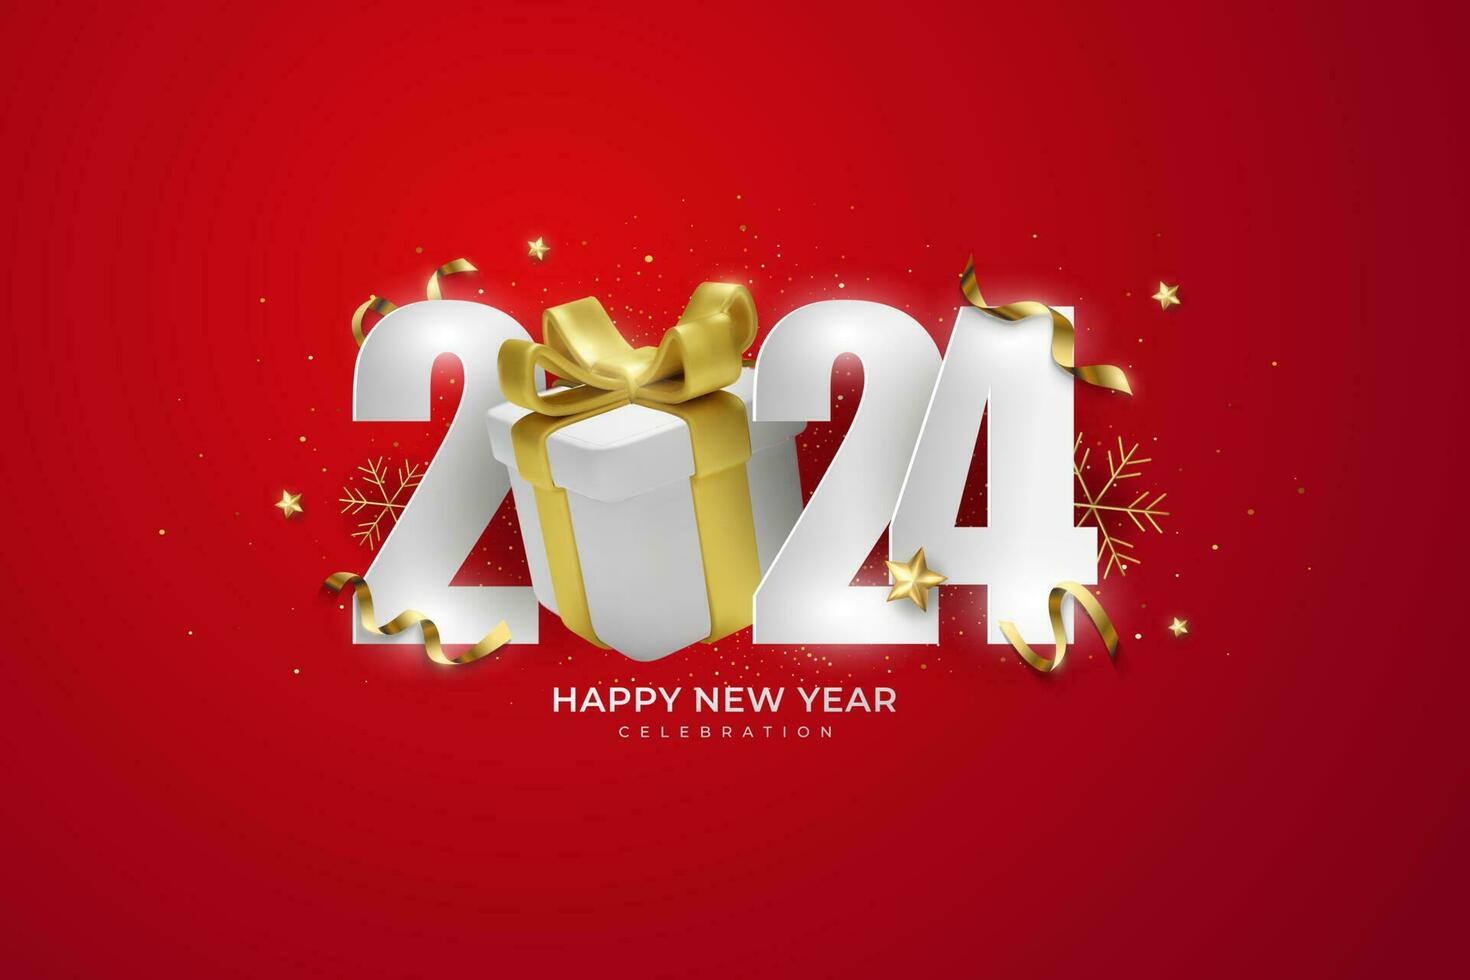 Happy New Year 2024. festive realistic decoration. Celebrate 2024 party on a red background vector